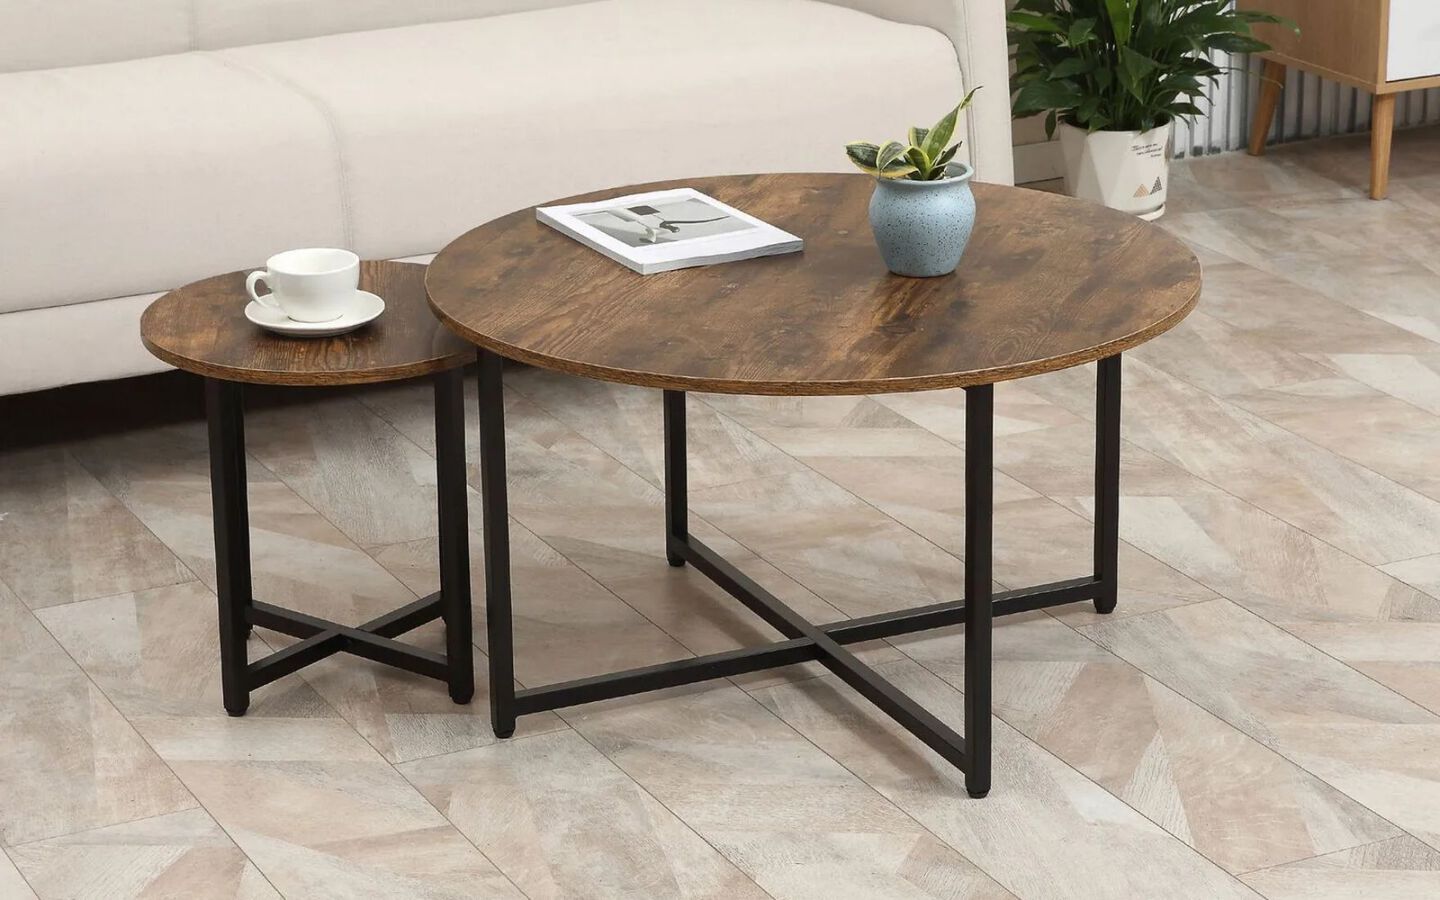 One large and on small brown and black coffee circular coffee table with metal legs